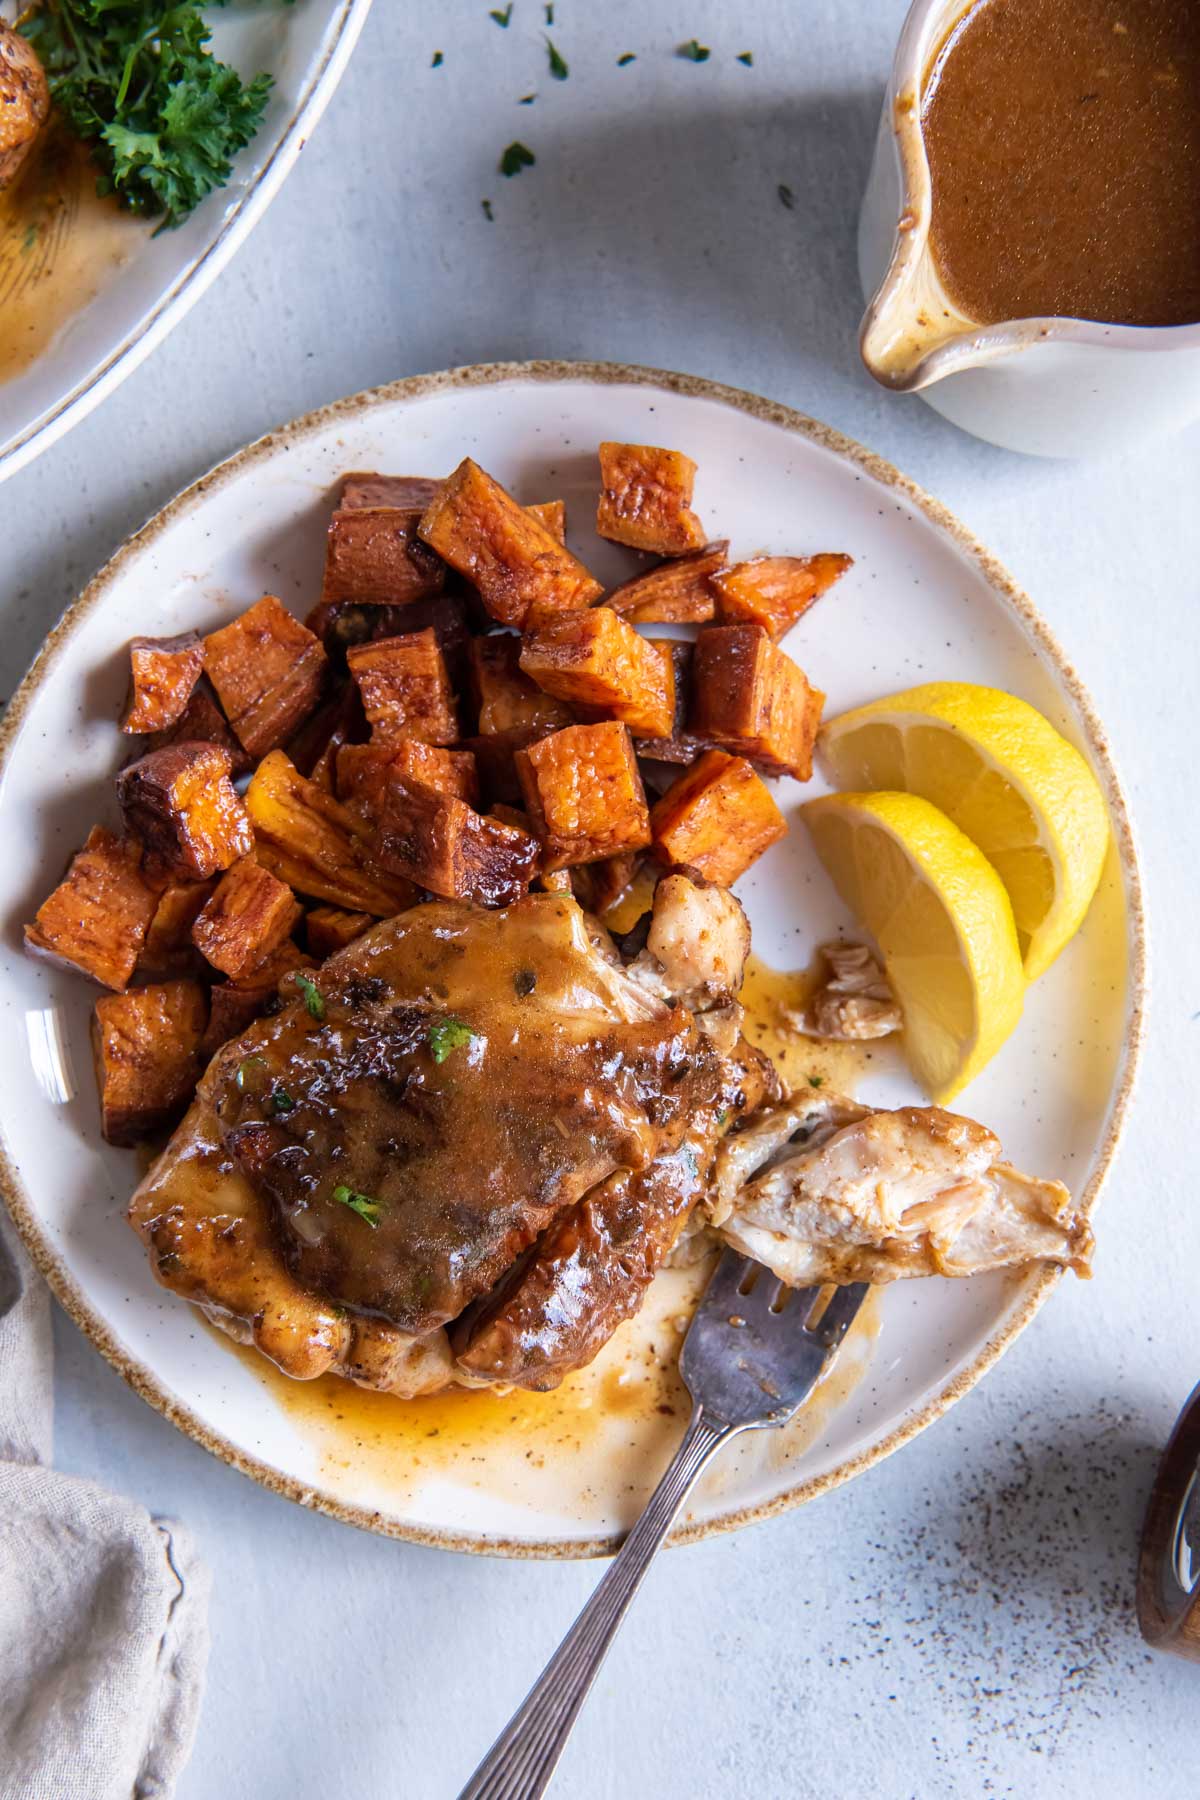 Instant Pot chicken thigh served with gravy and roasted sweet potatoes.